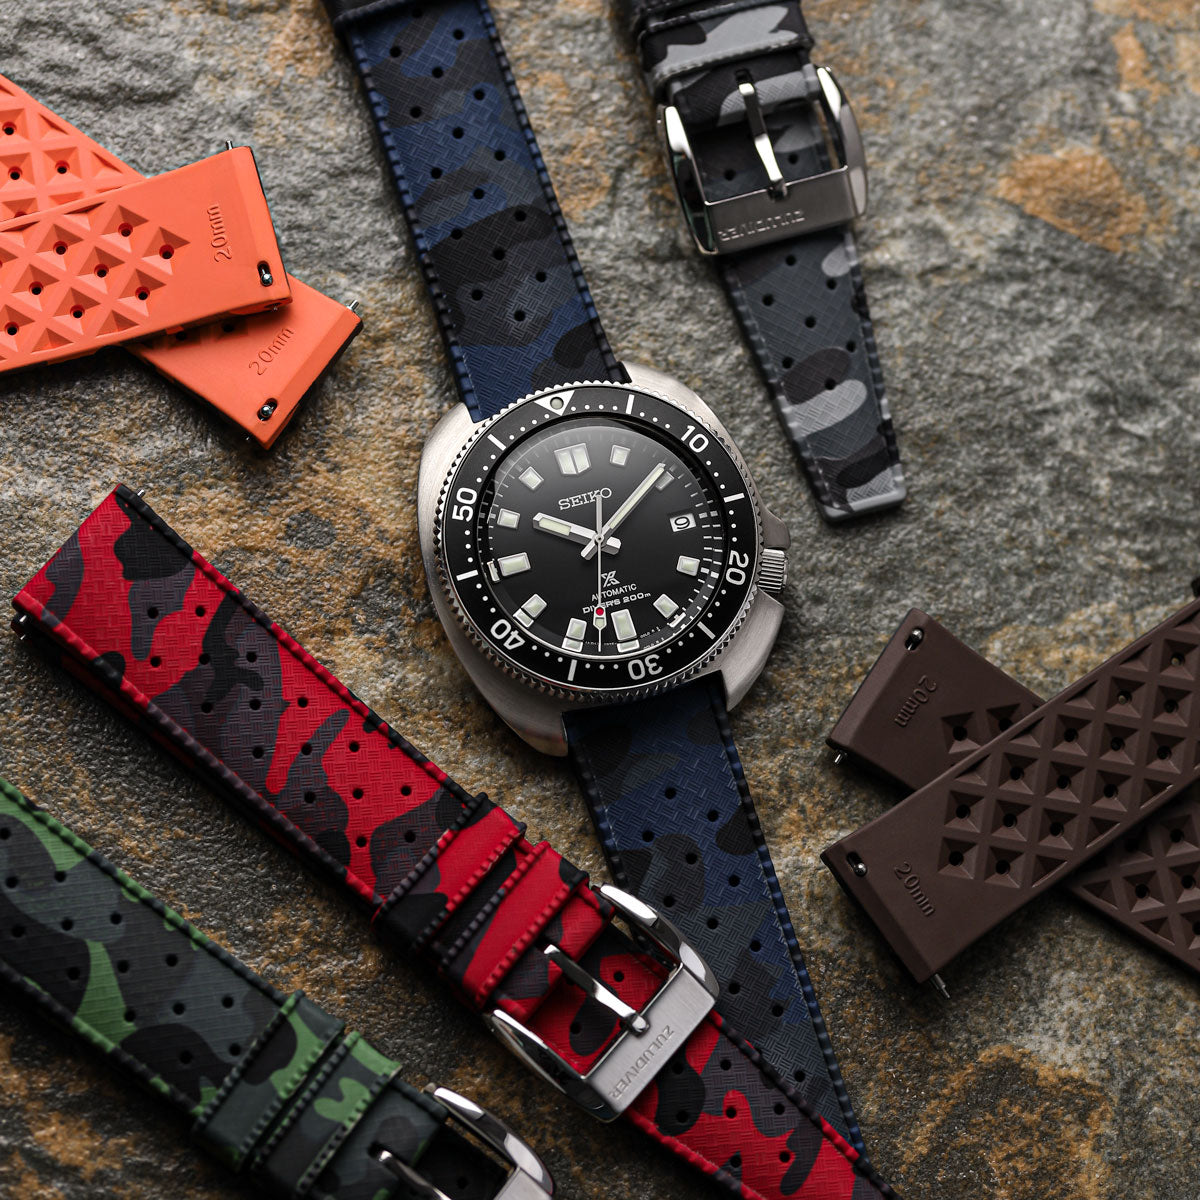 ZULUDIVER Tropical Style Camo Rubber Watch Strap - Red - additional image 2